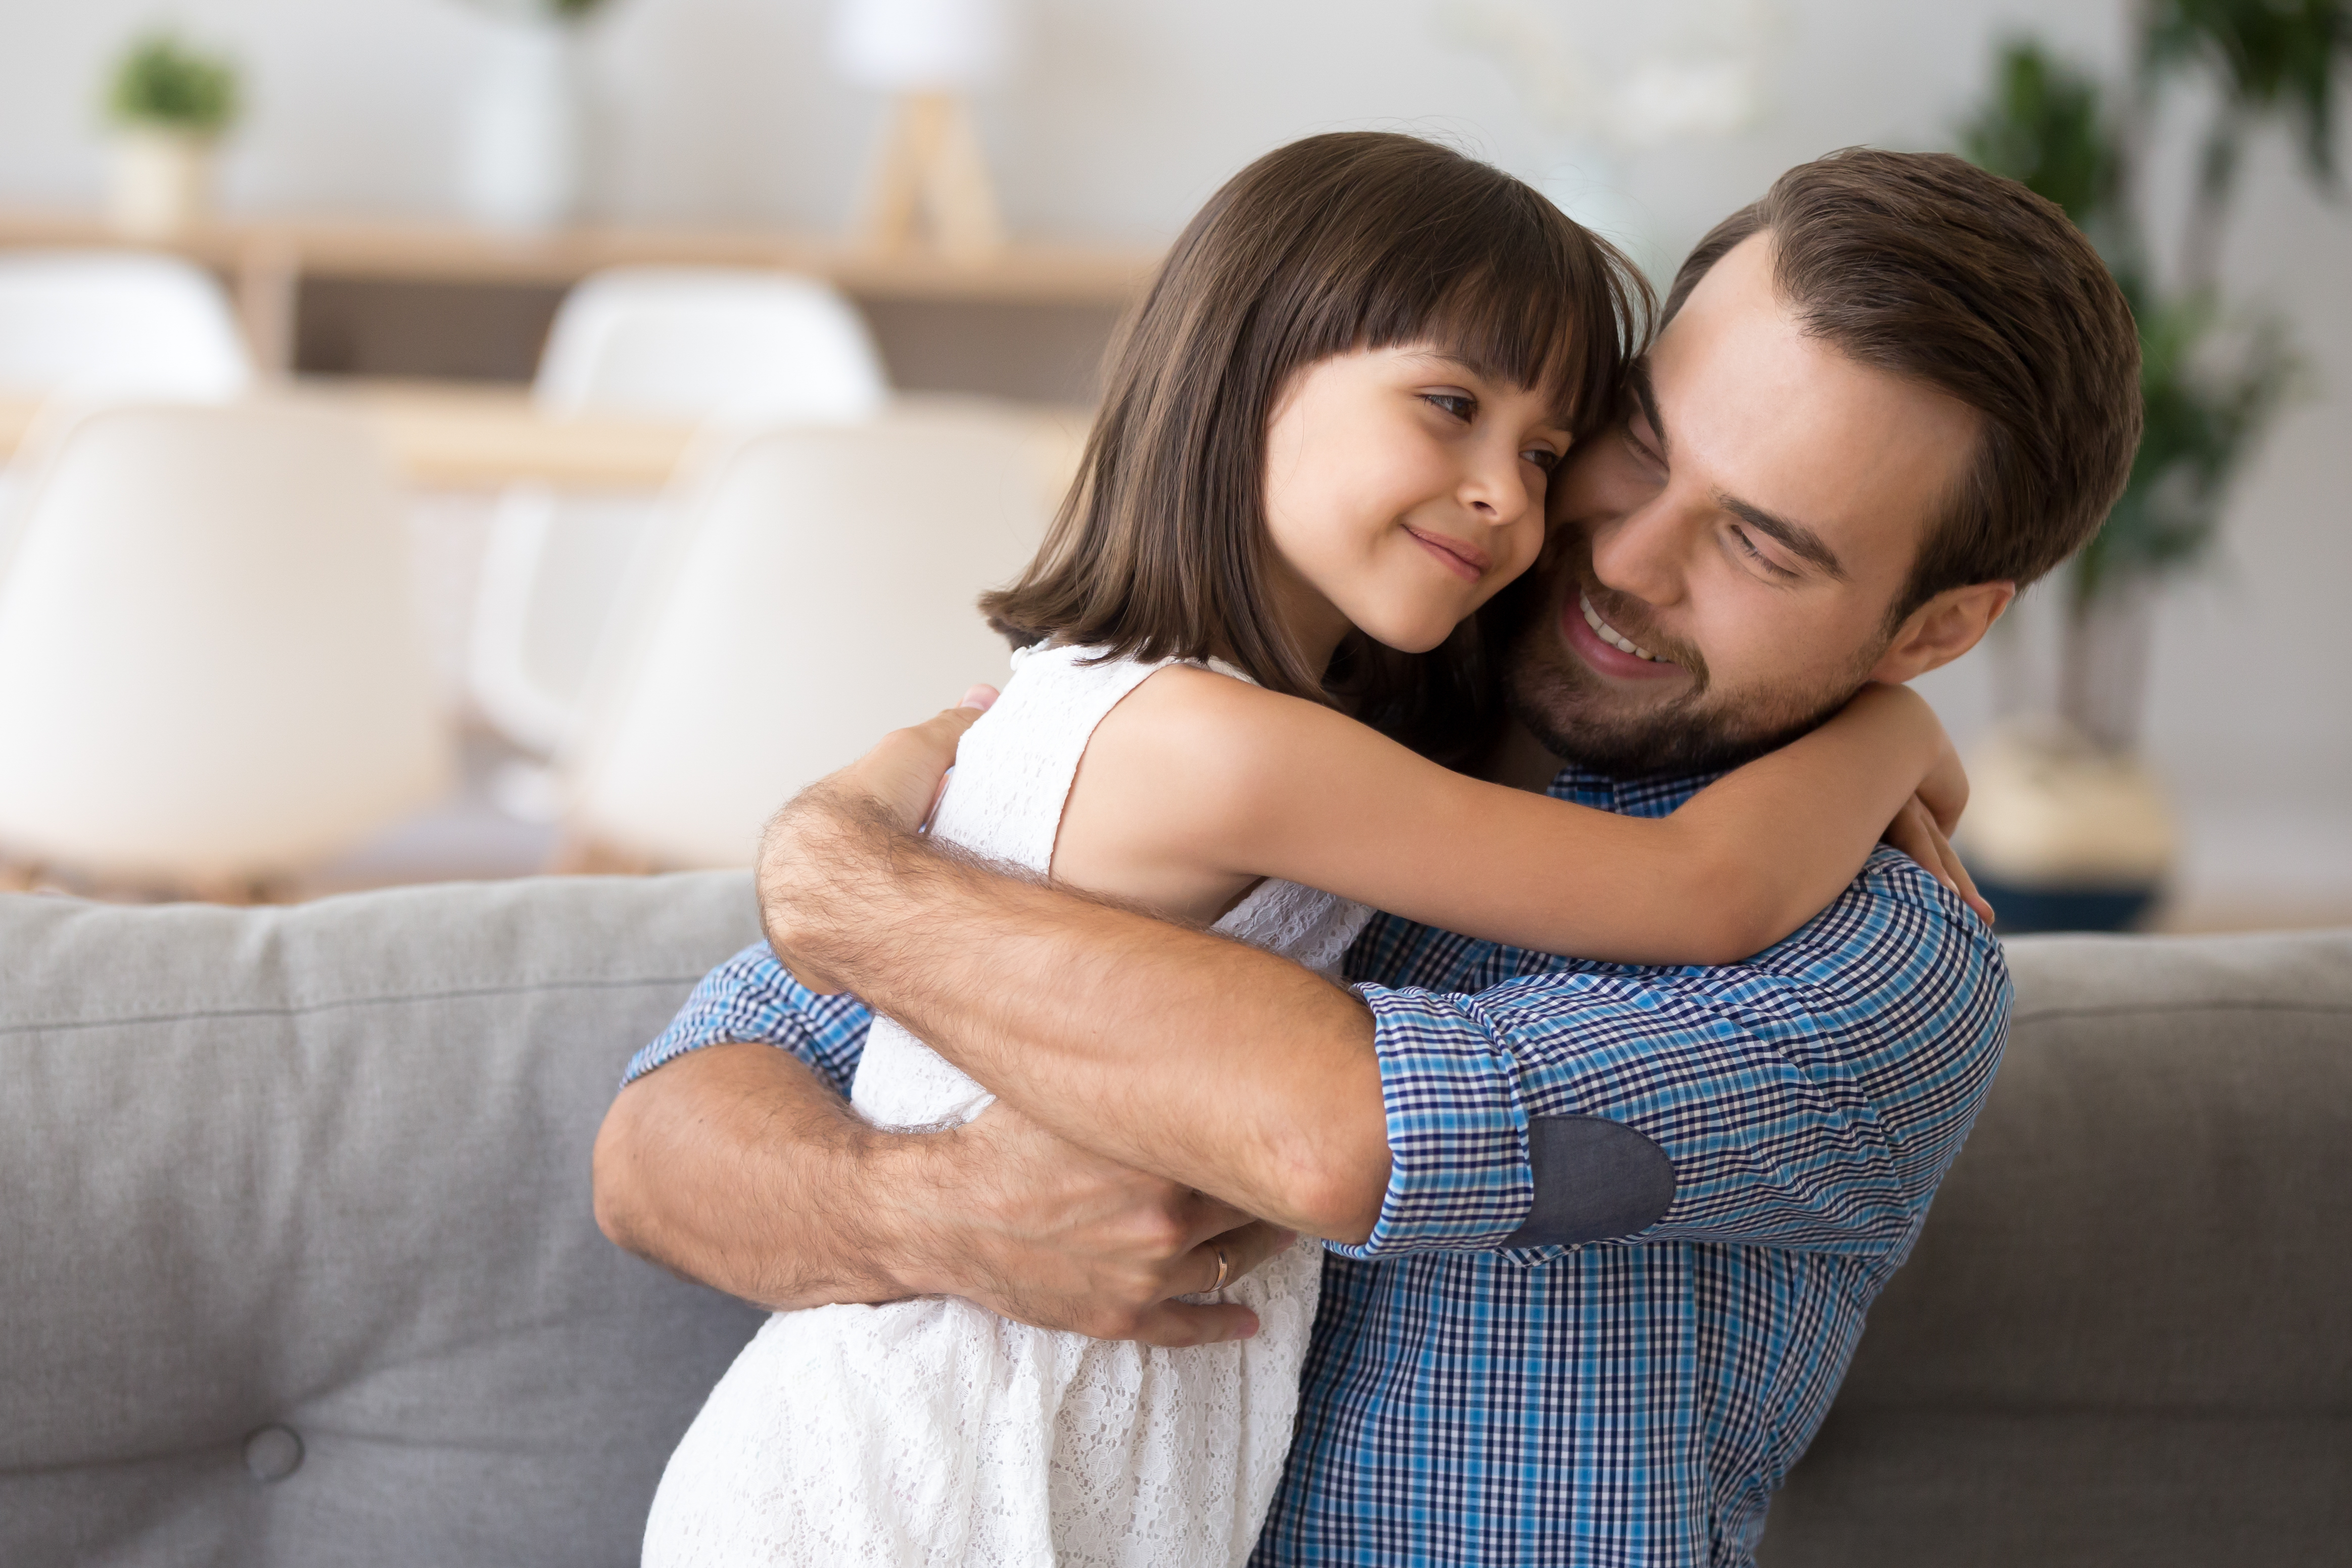 A father and daughter hugging | Source: Shutterstock